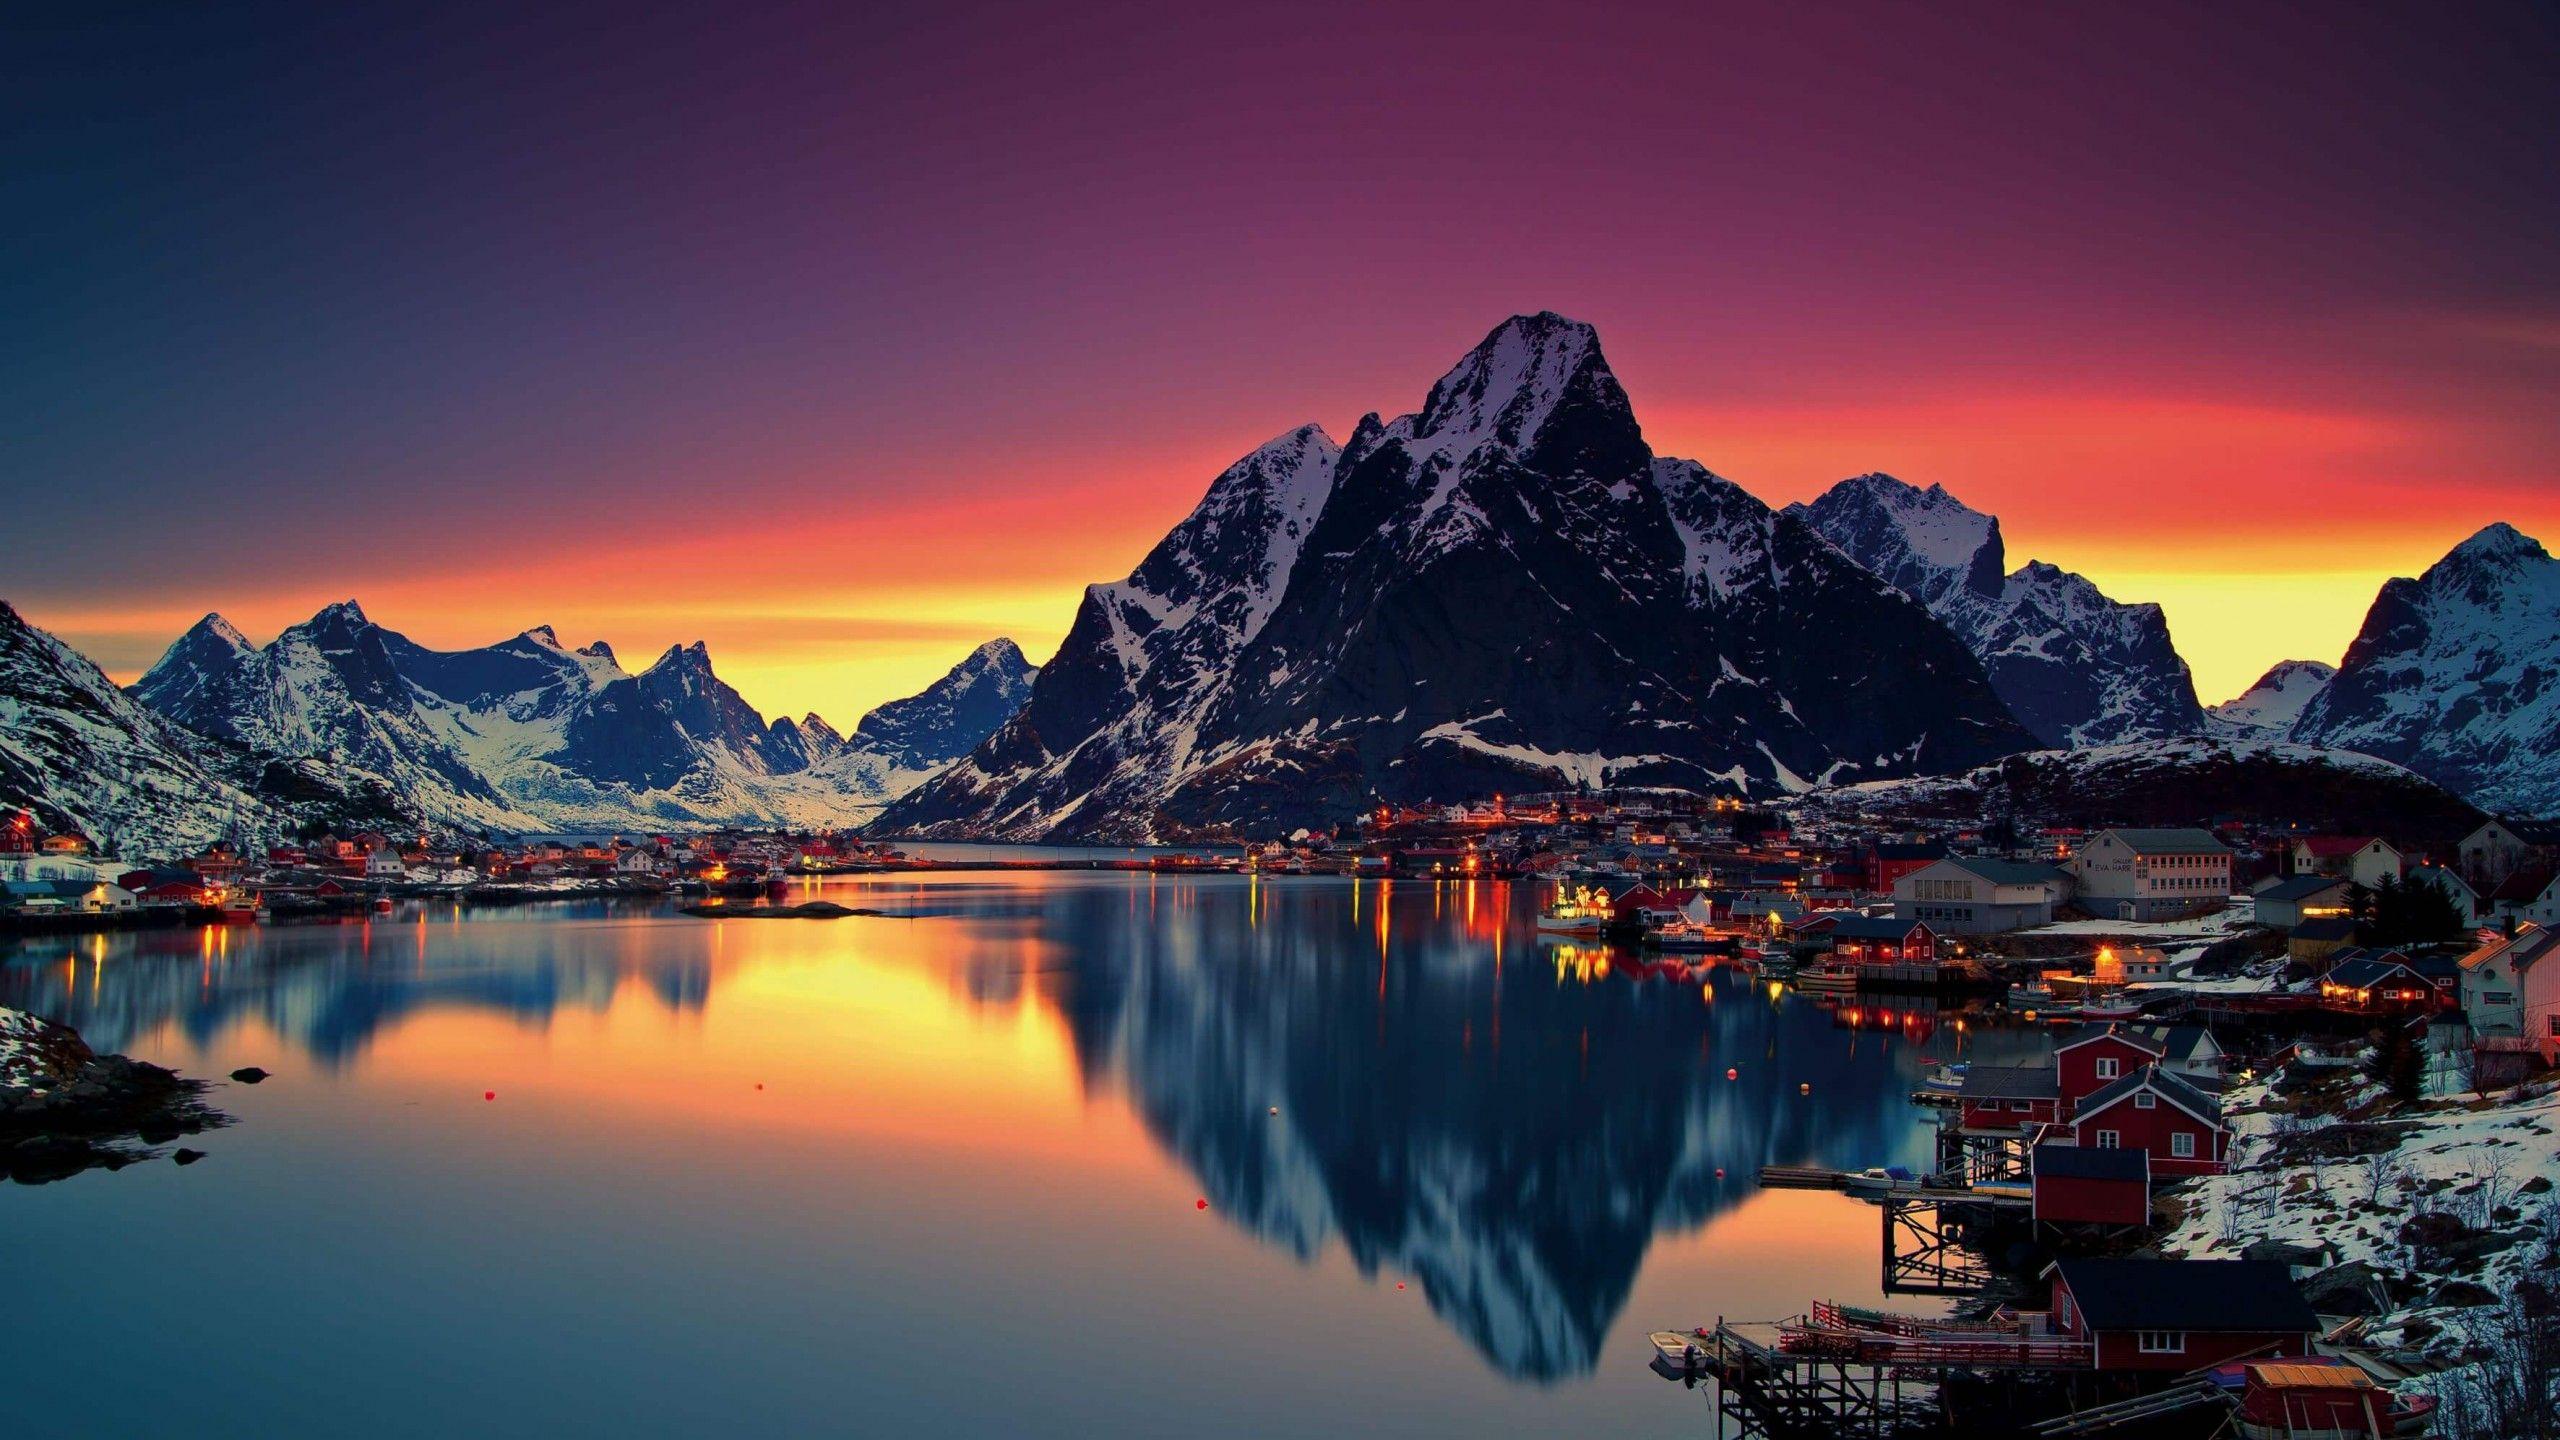 Wallpaper.wiki Norway Wallpaper 2560x1440 For Tablets PIC WPD007532